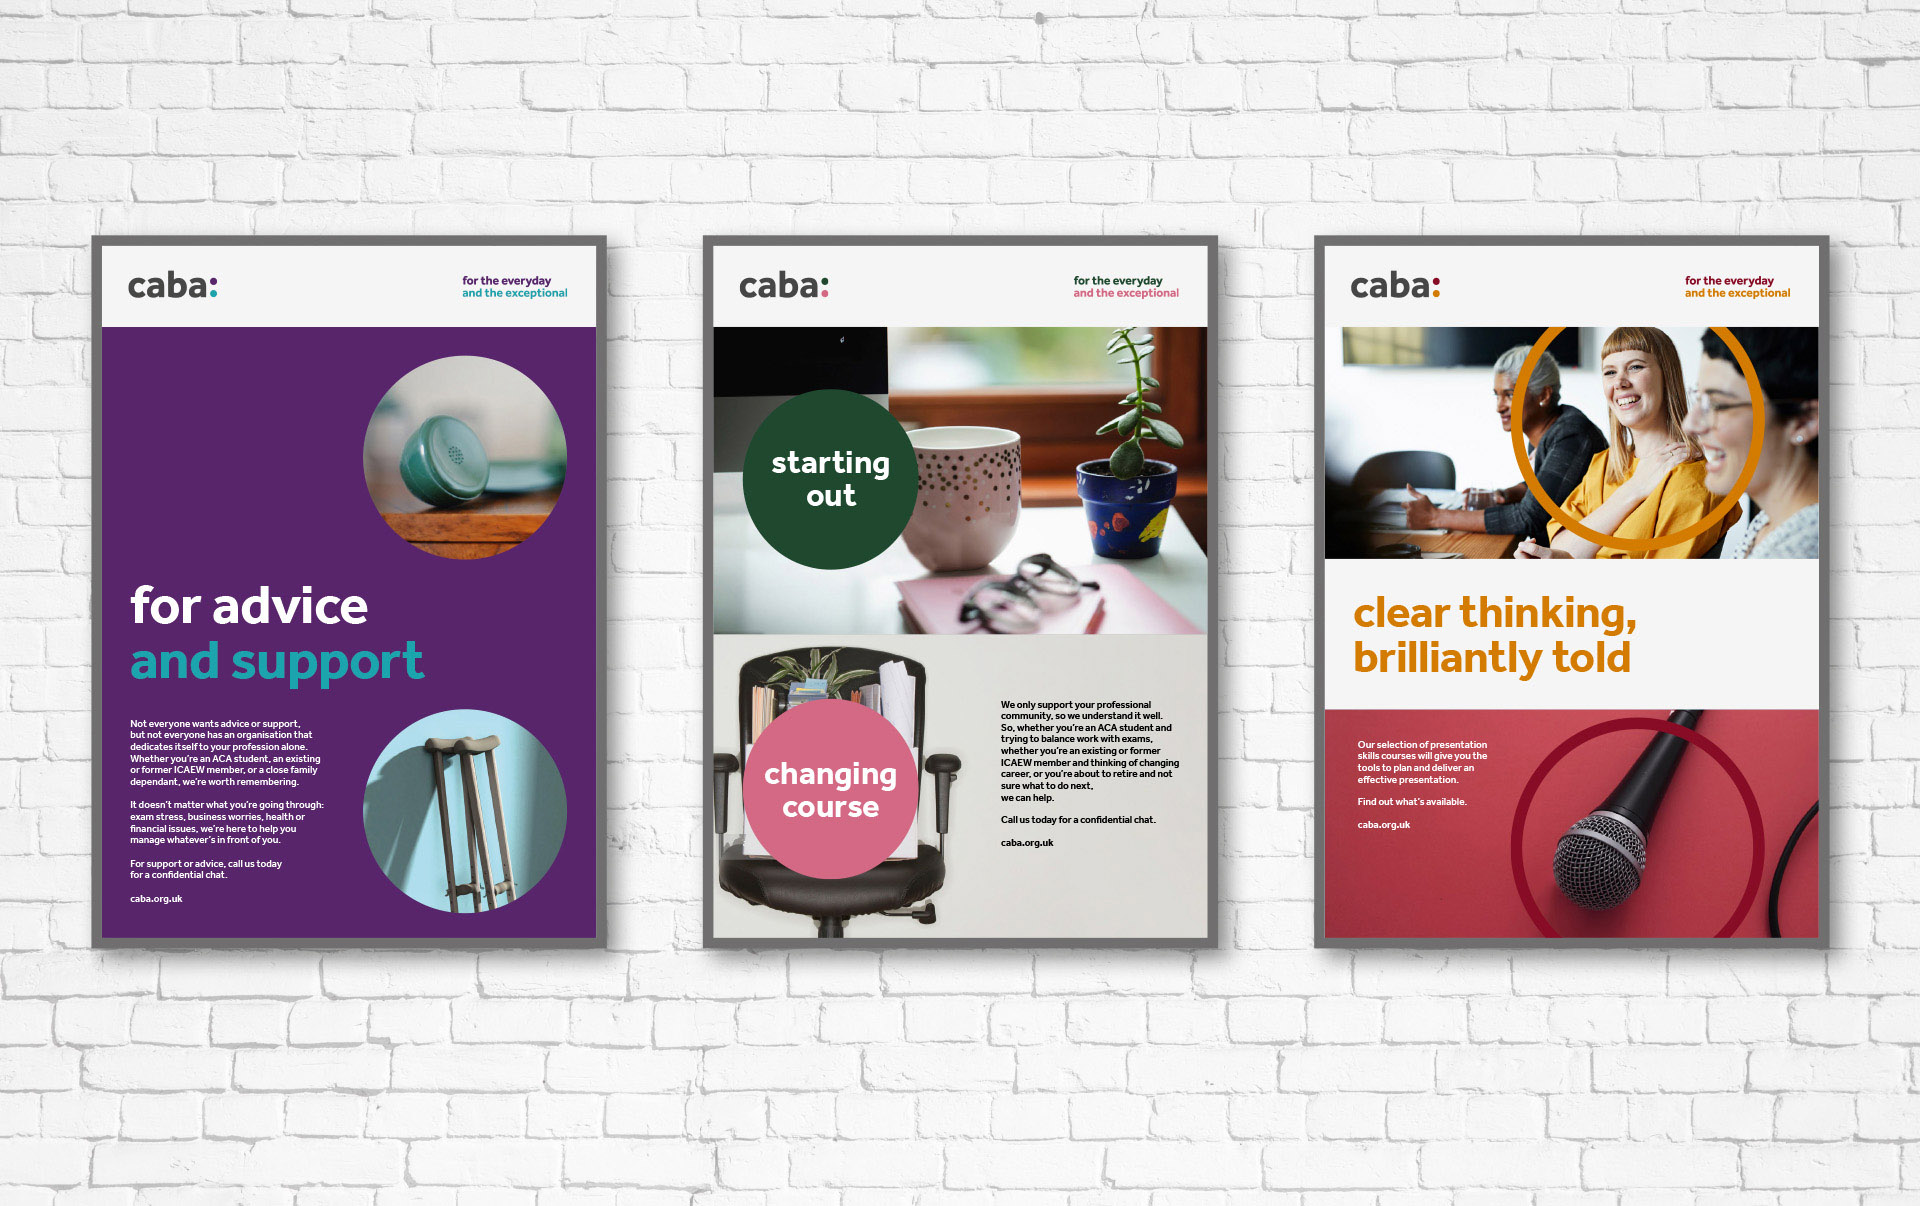 caba - branded posters